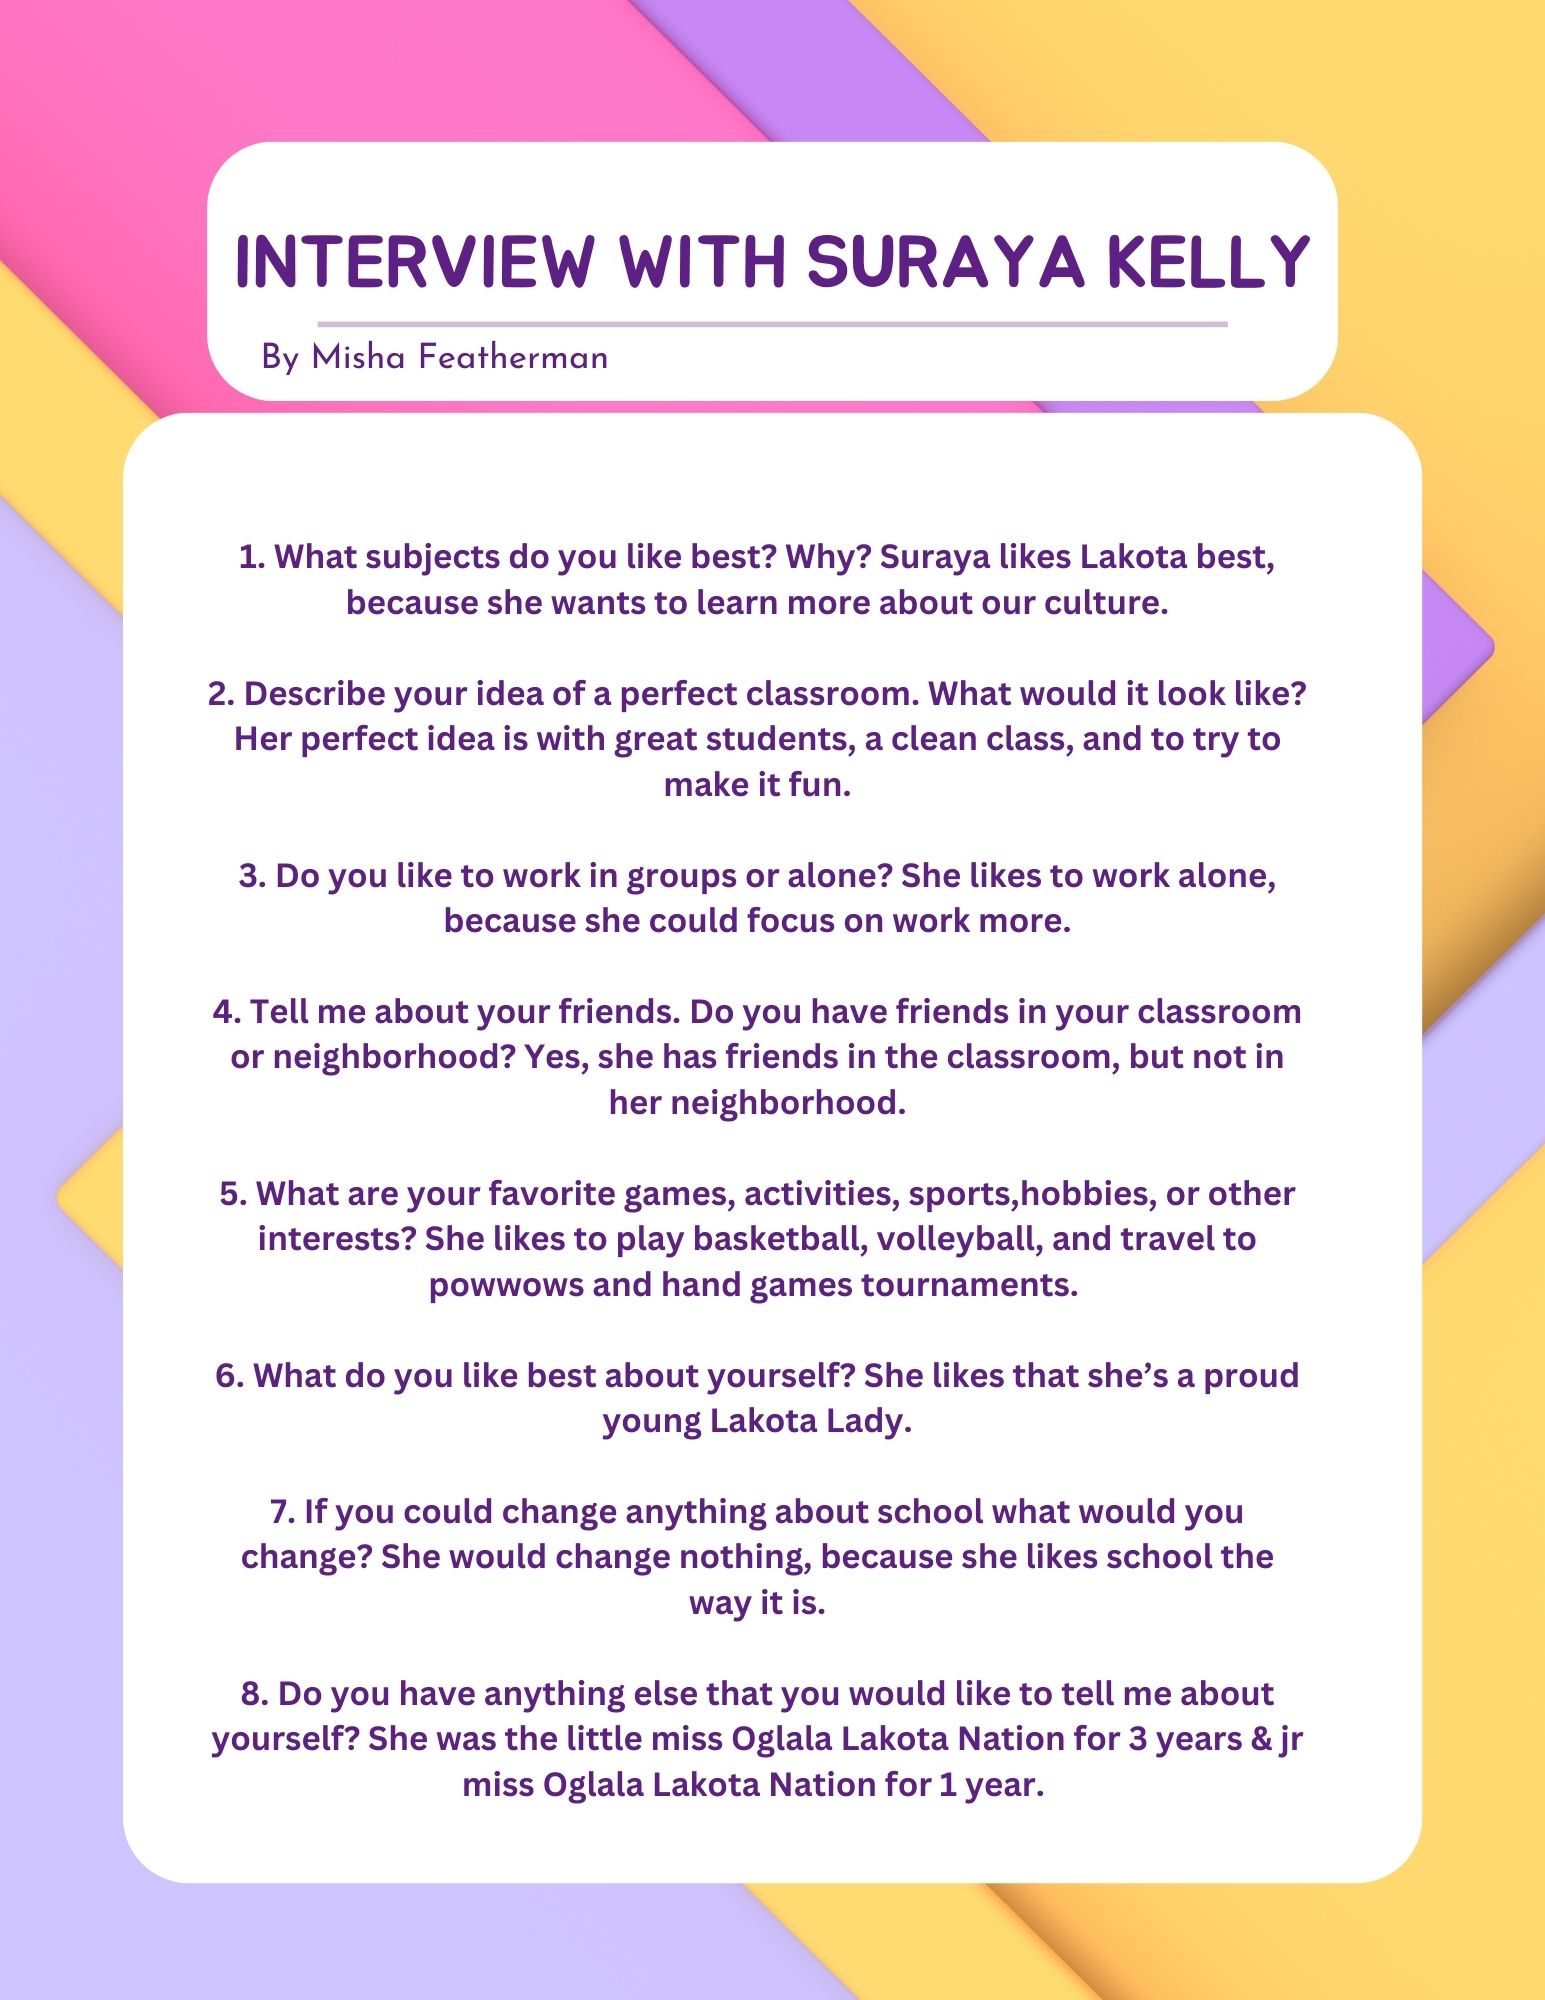 Student Interview with Suraya Kelly by Misha Featherman